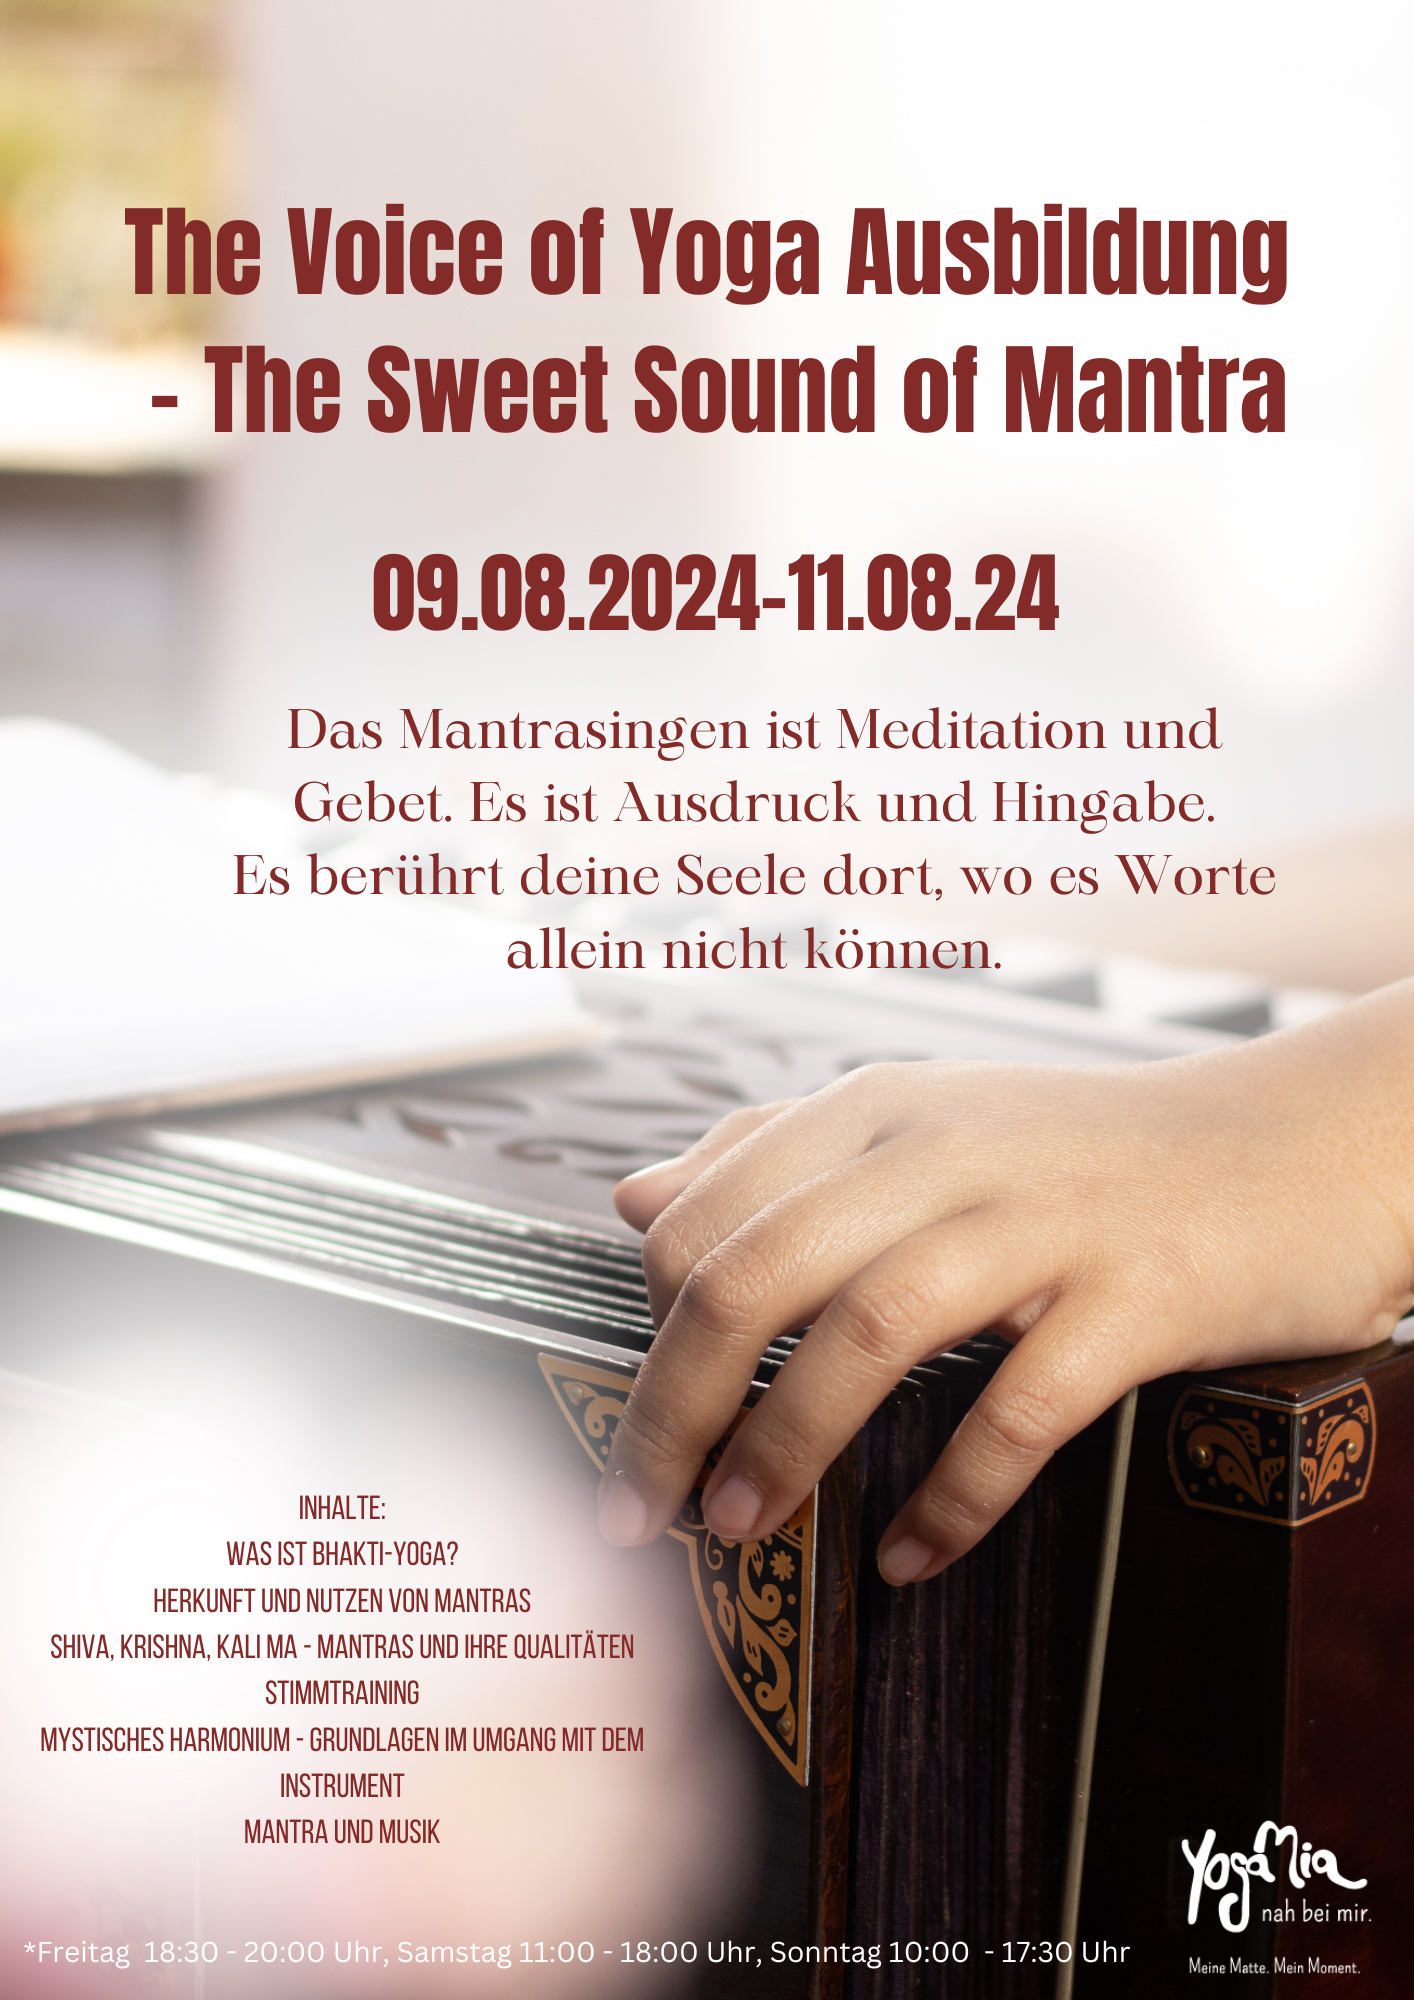 The Voice of Yoga Ausbildung - The Sweet Sound of Mantra